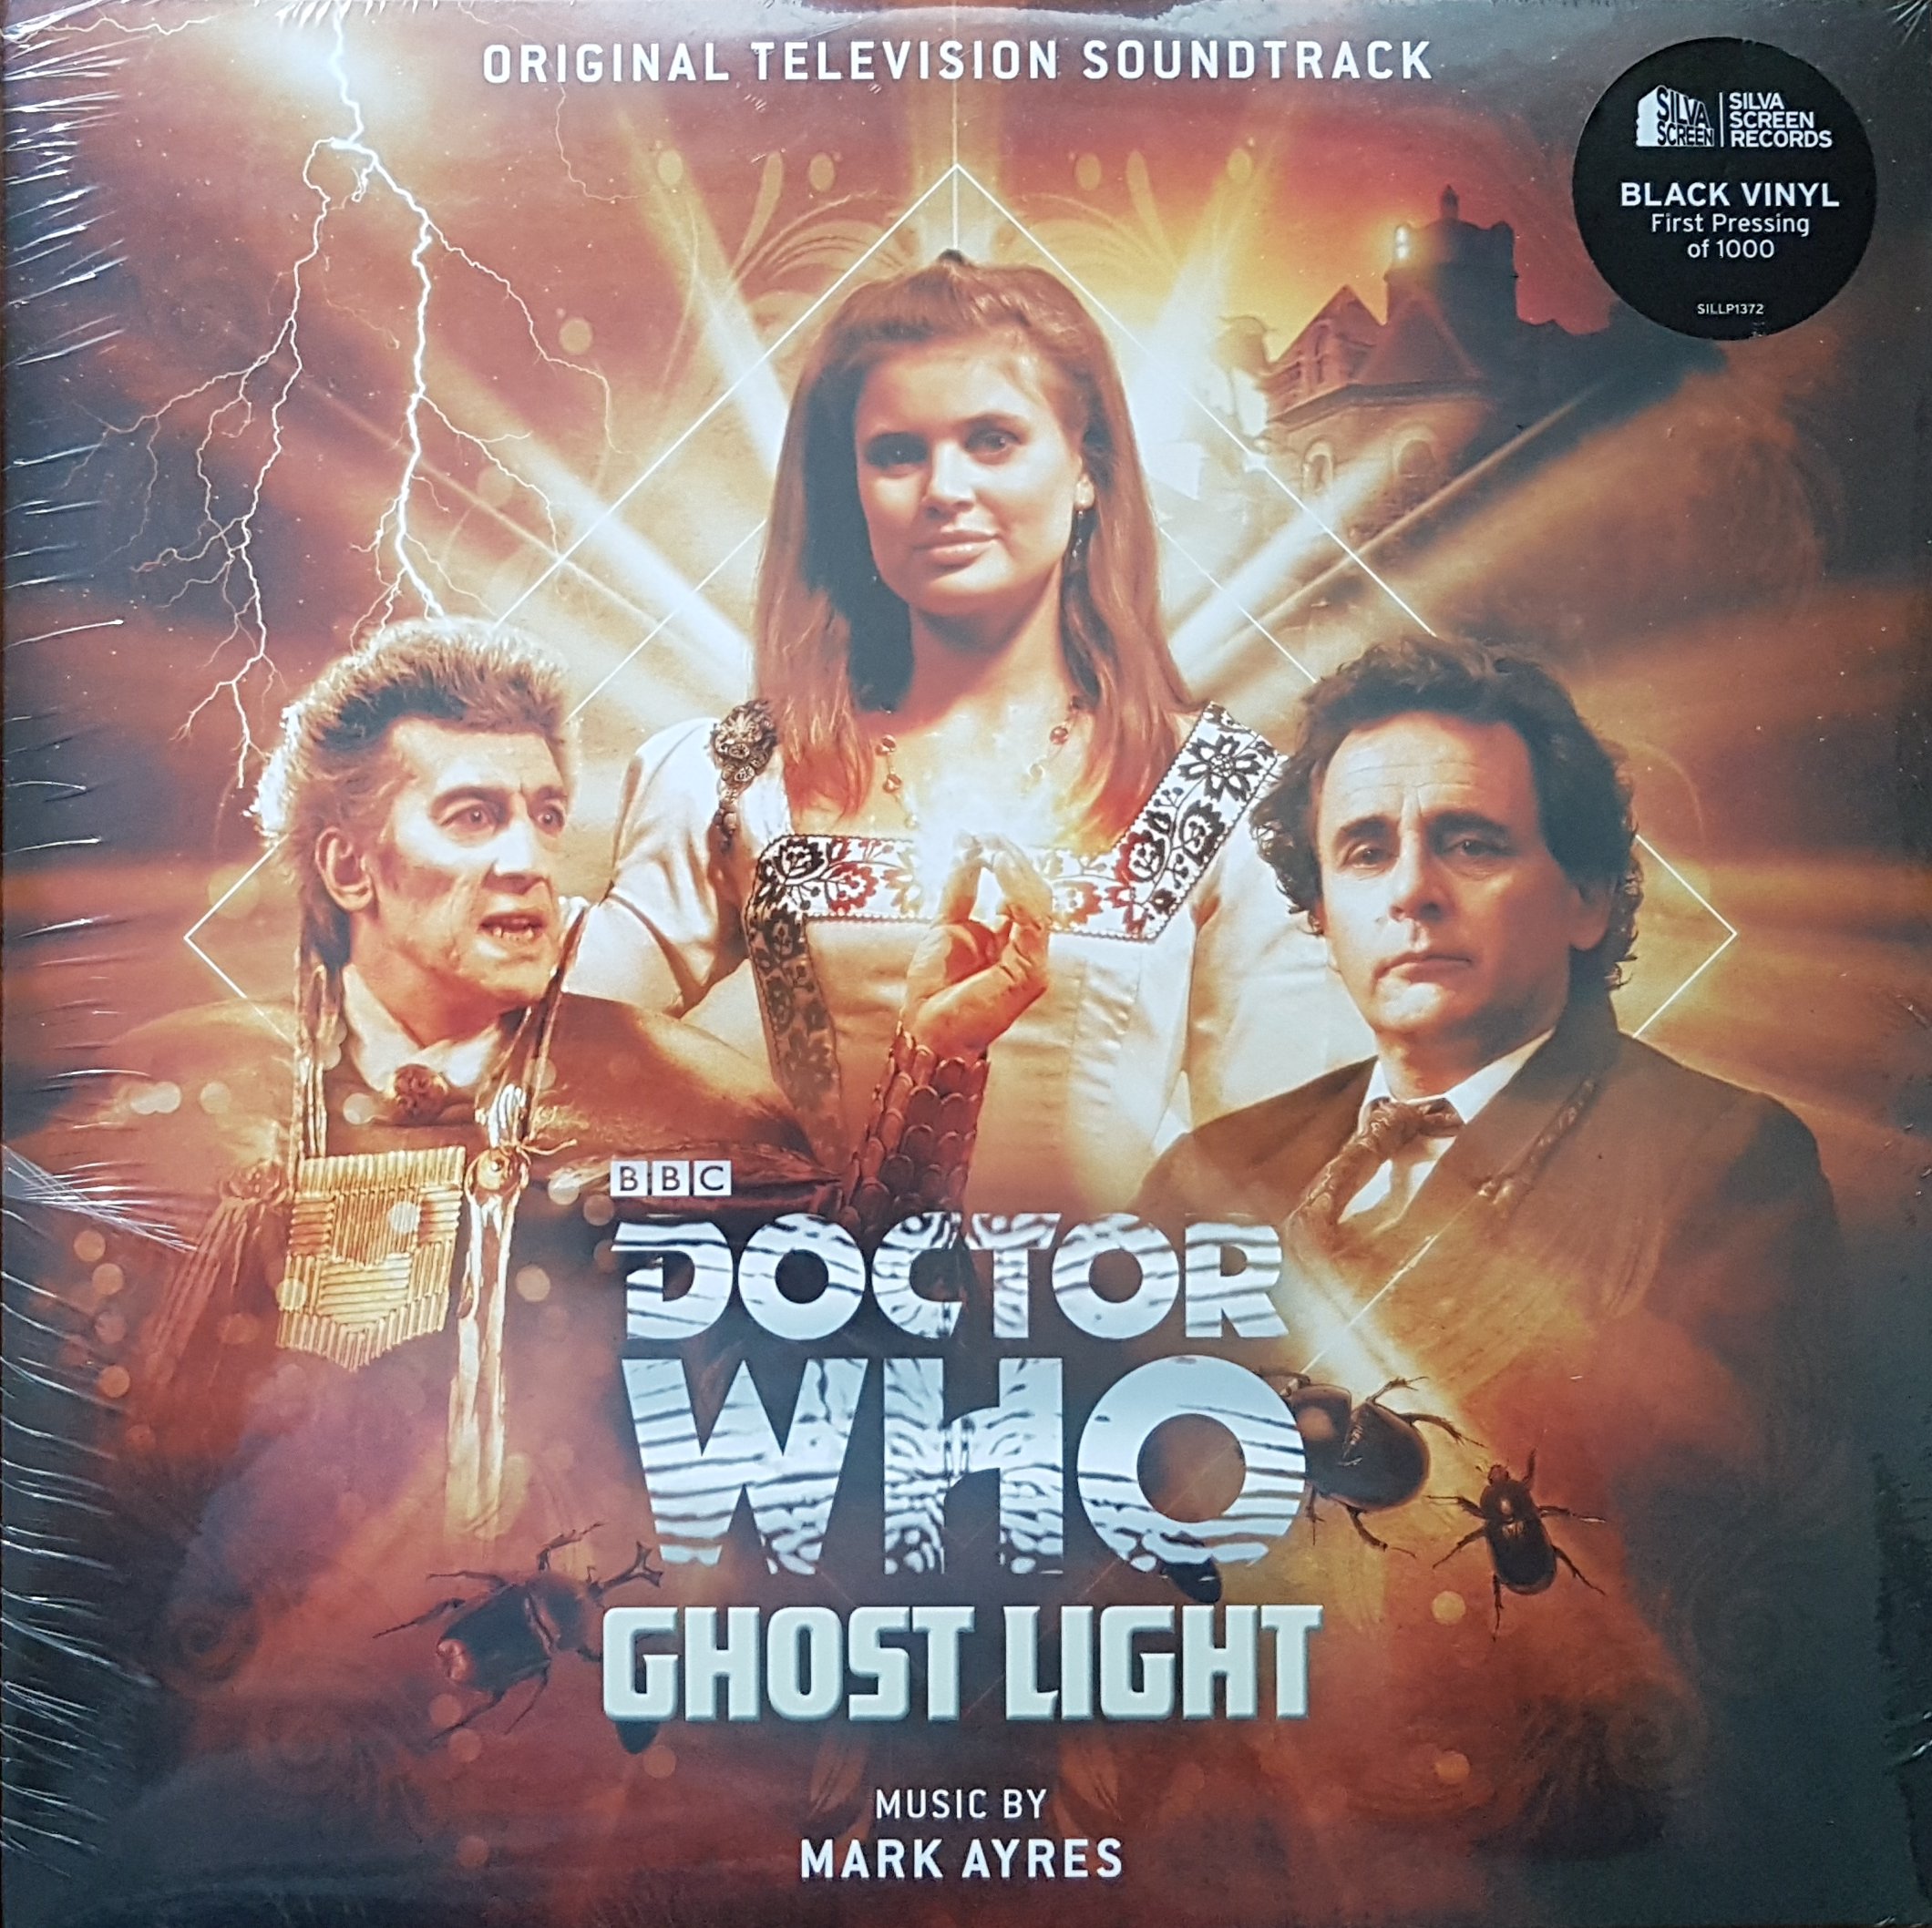 Picture of SILLP 1372 Doctor Who - Ghost light by artist Mark Ayres from the BBC albums - Records and Tapes library